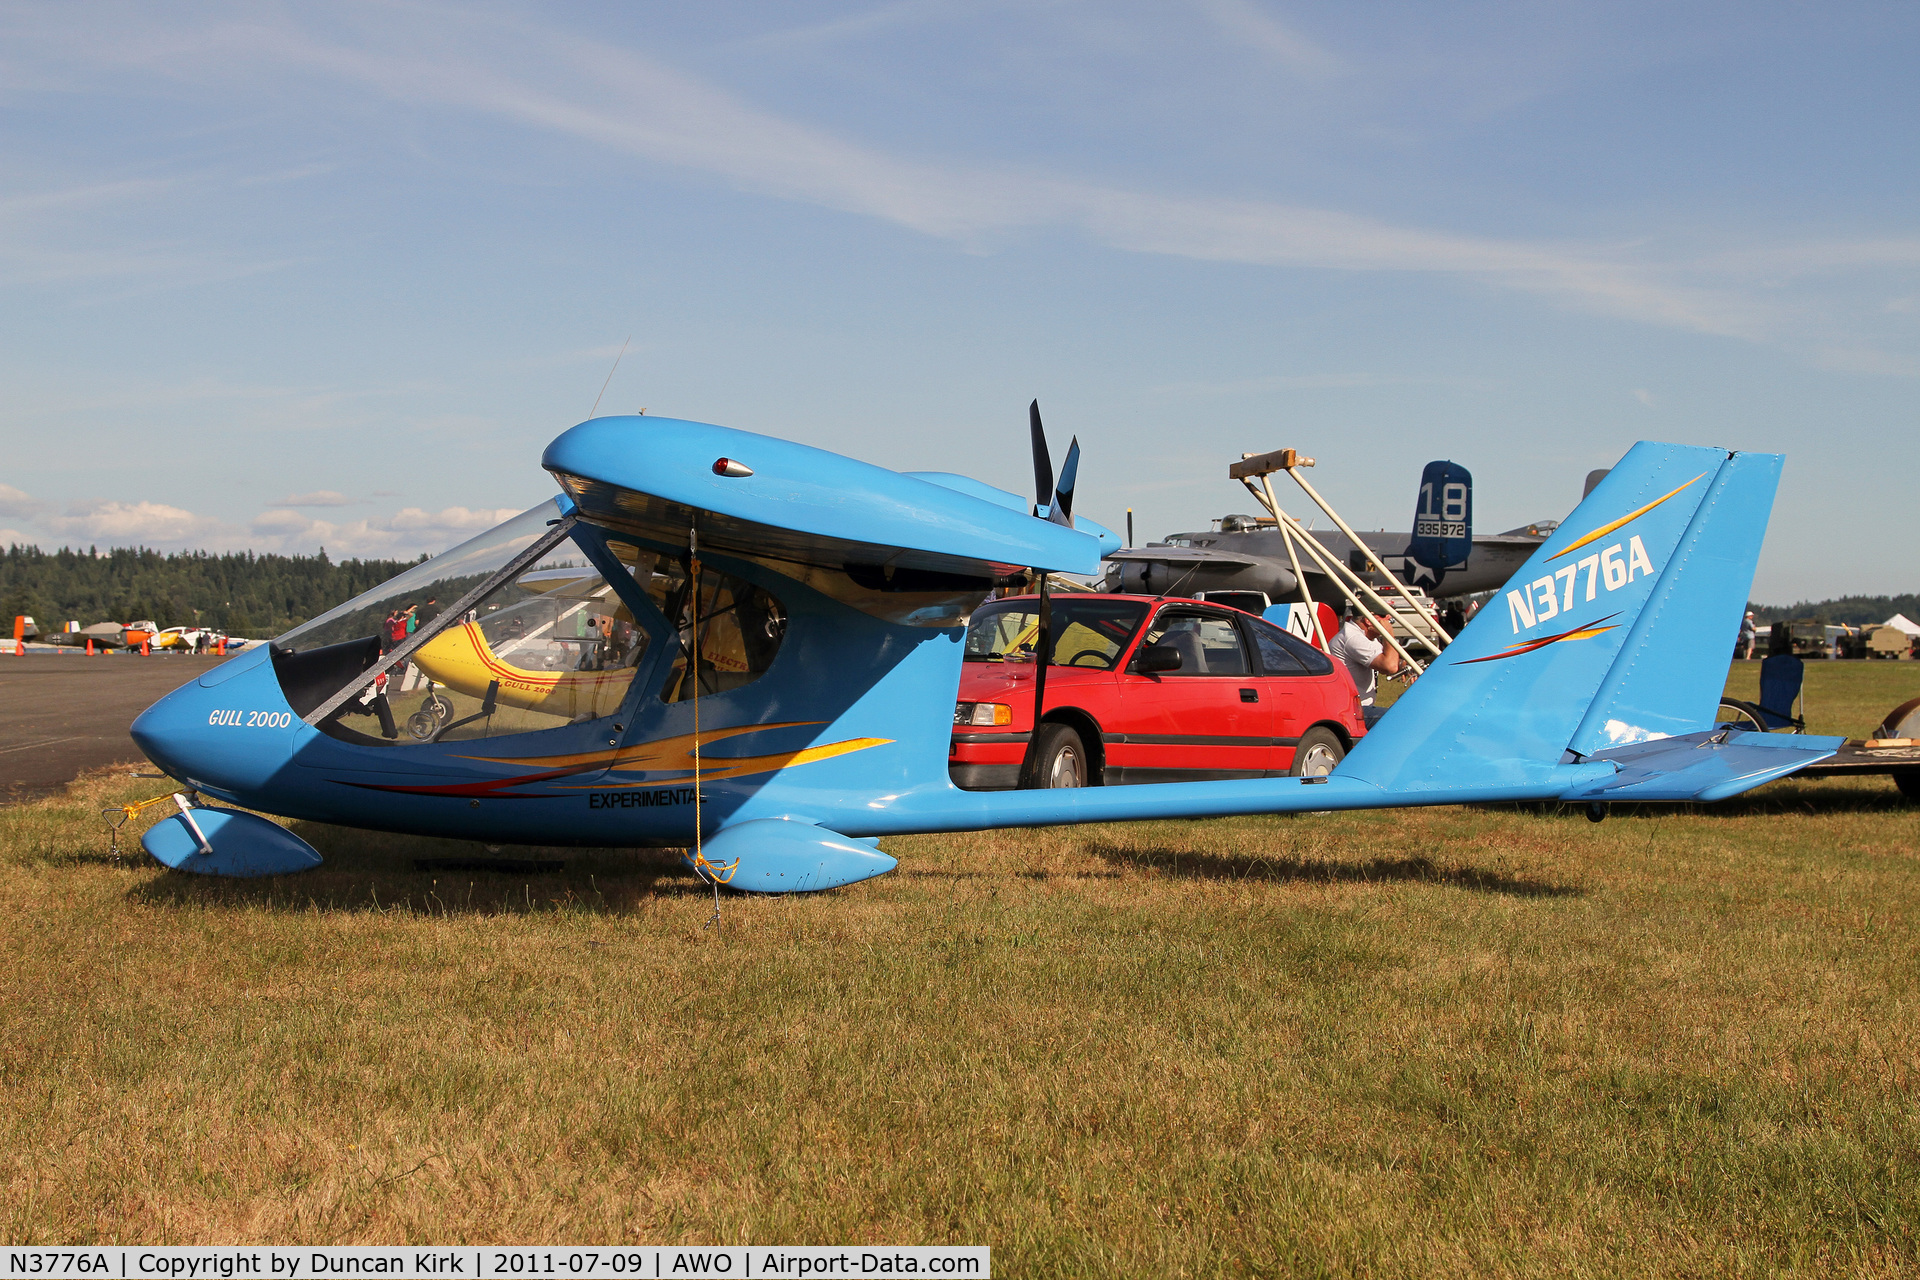 N3776A, 2000 Earthstar Gull 2000 C/N 001188, The AWO fly-in attracts many microlights